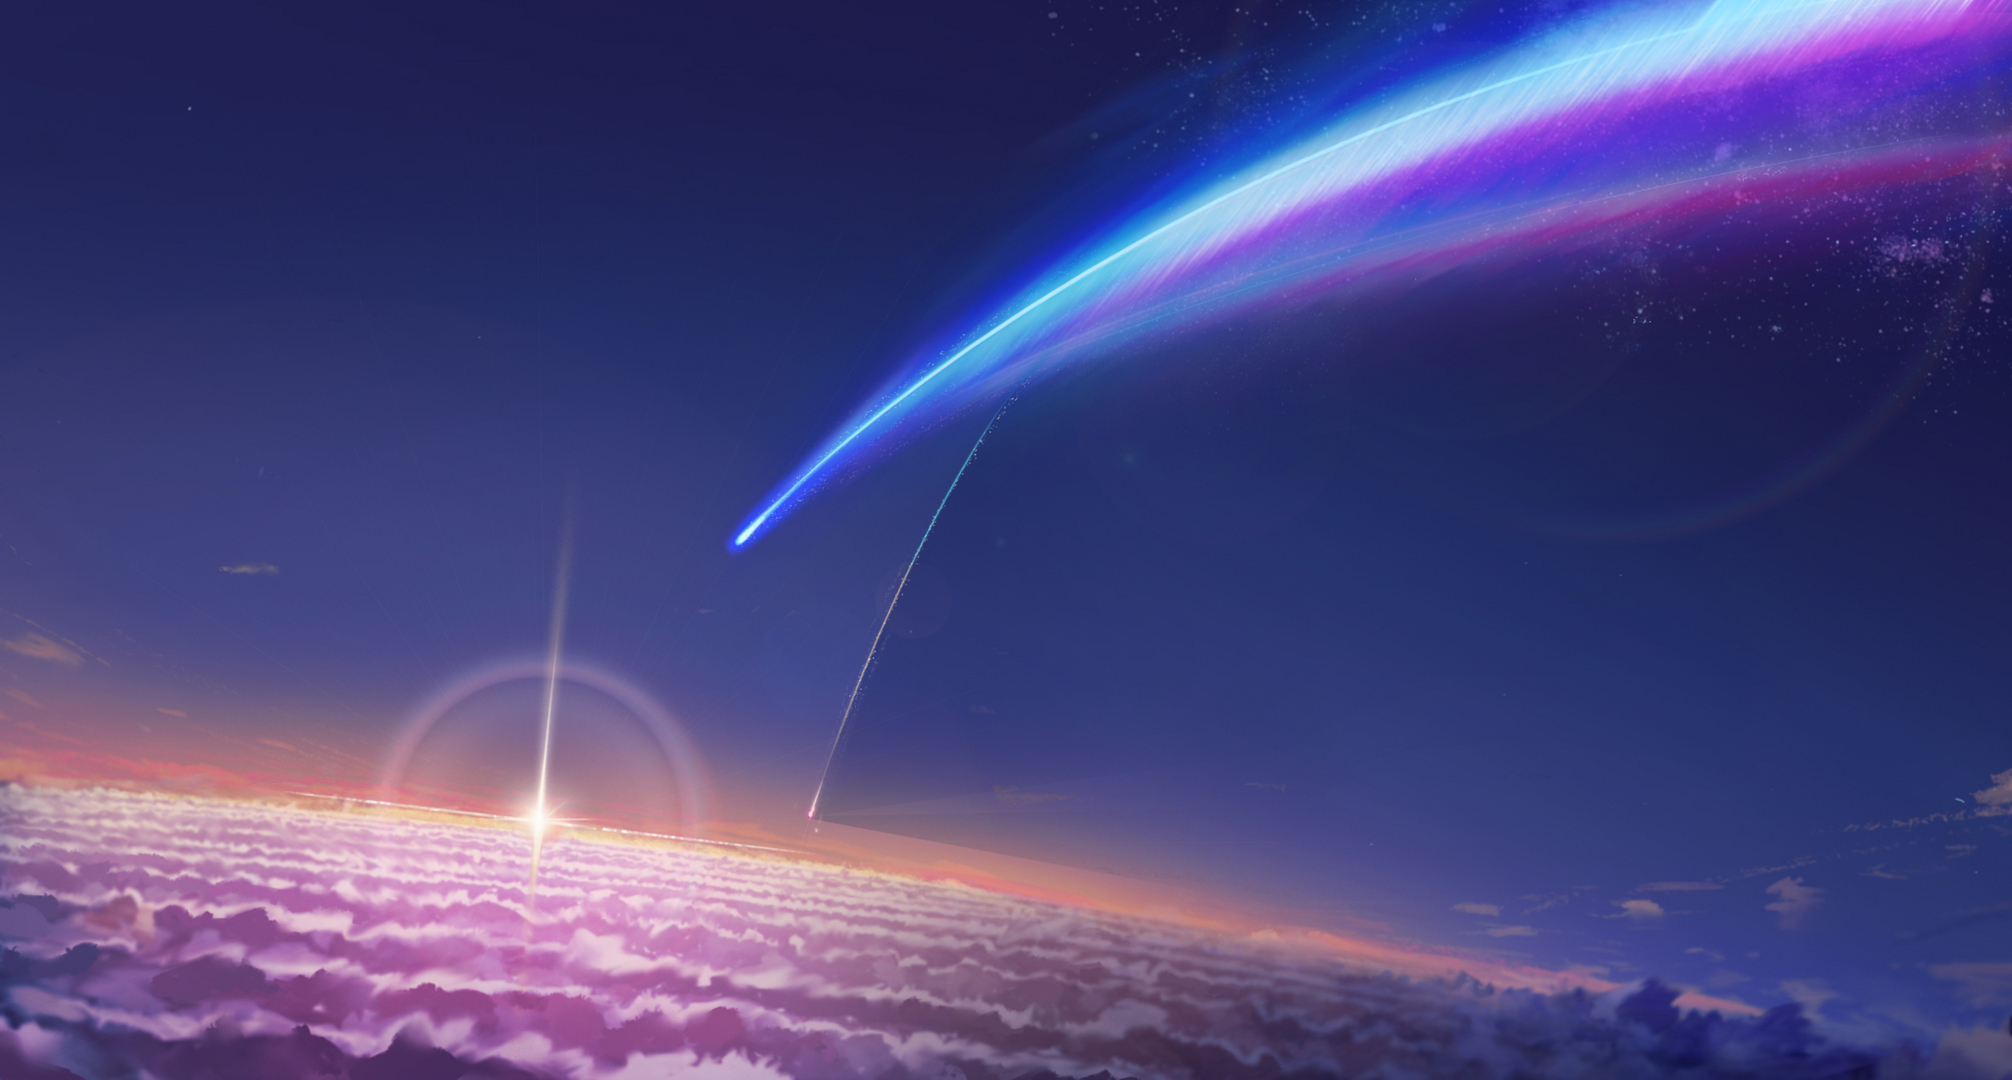  Your  Name  HD Wallpaper  Background  Image 2012x1080 